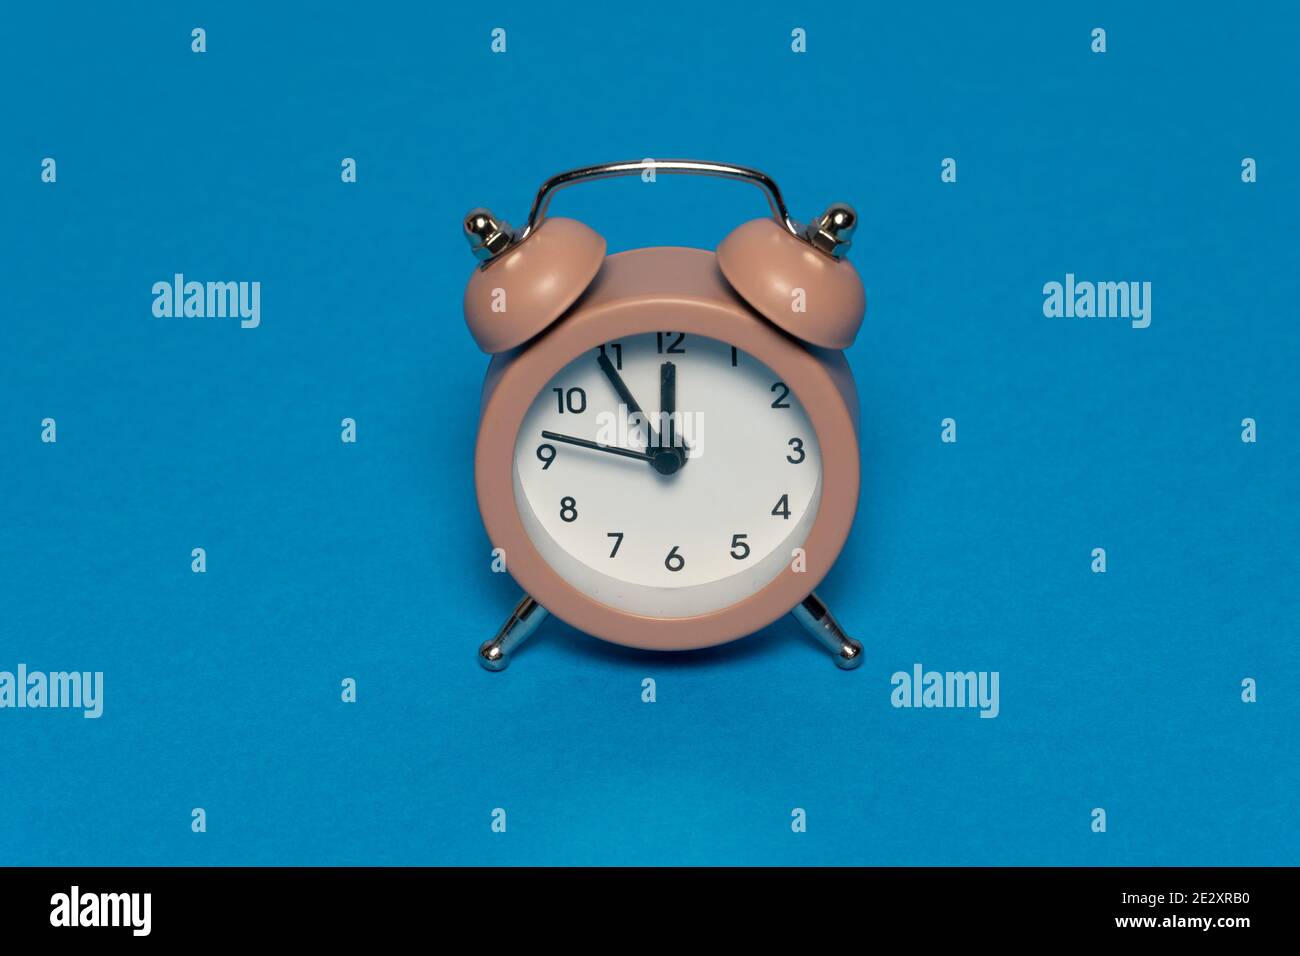 Brown alarm retro clock on blue background. Five minutes to twelve. Creative time concept Stock Photo